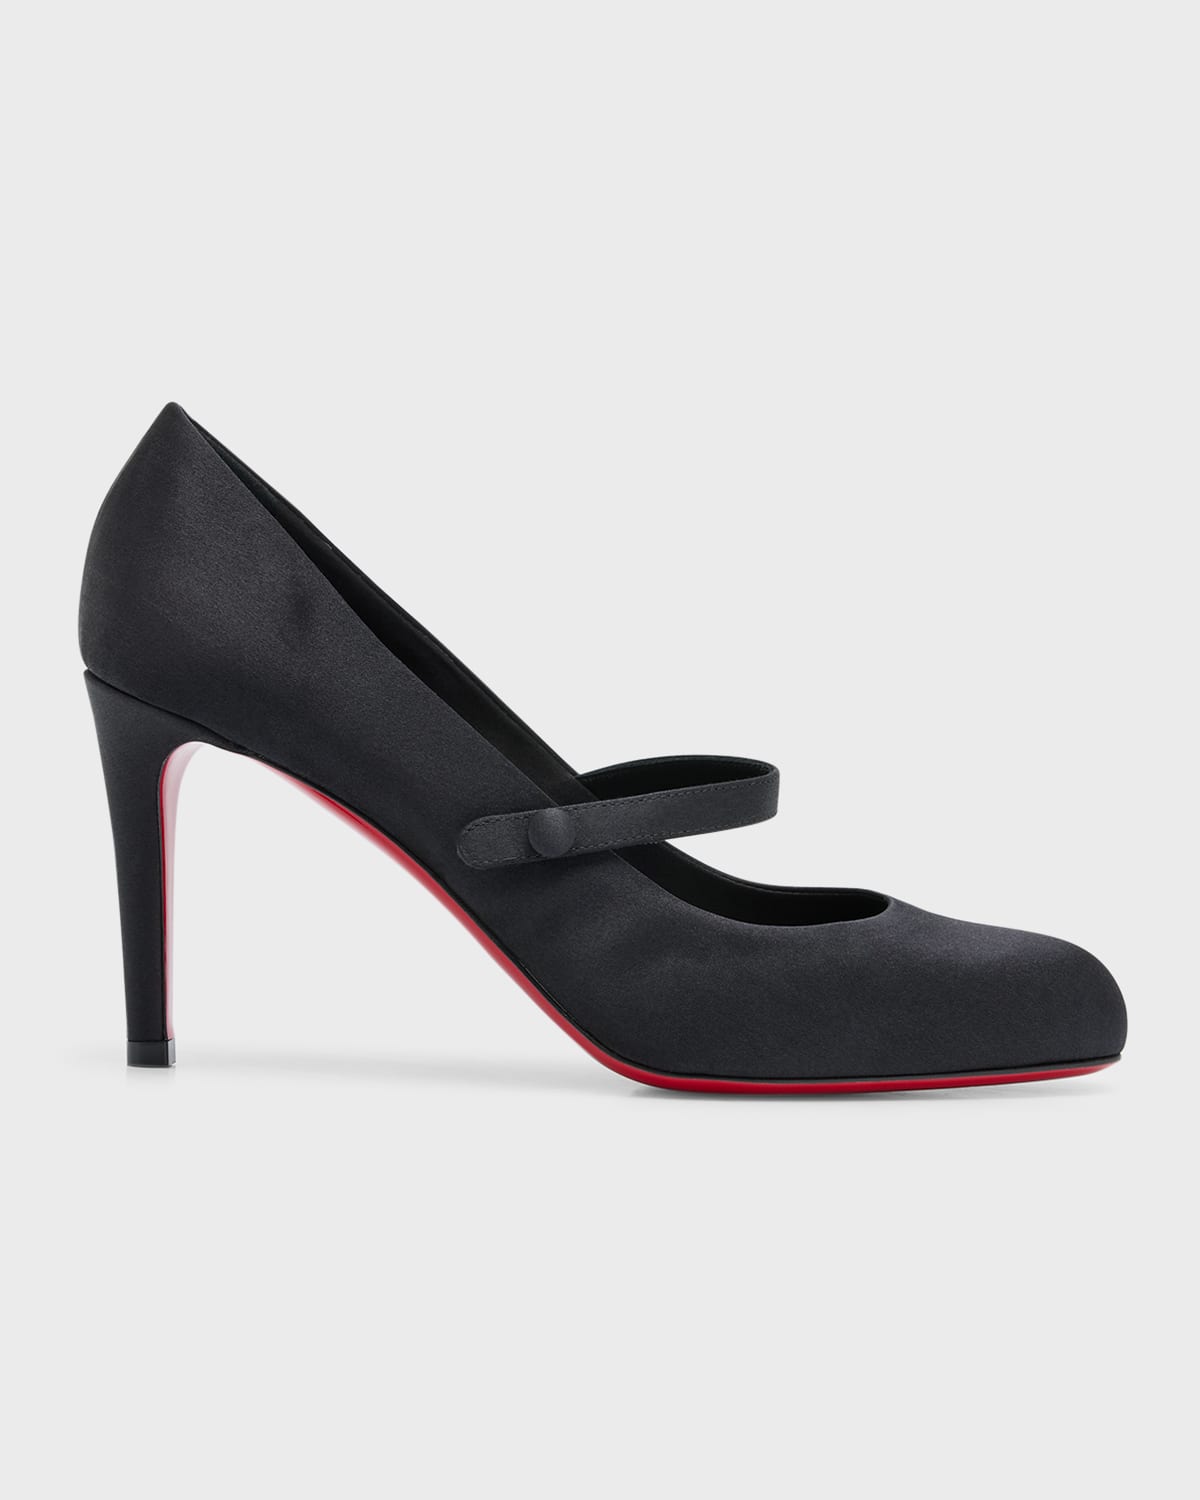 Christian Louboutin Pumppie Wallis Red Sole Crepe Satin Mary Jane Pumps In Black